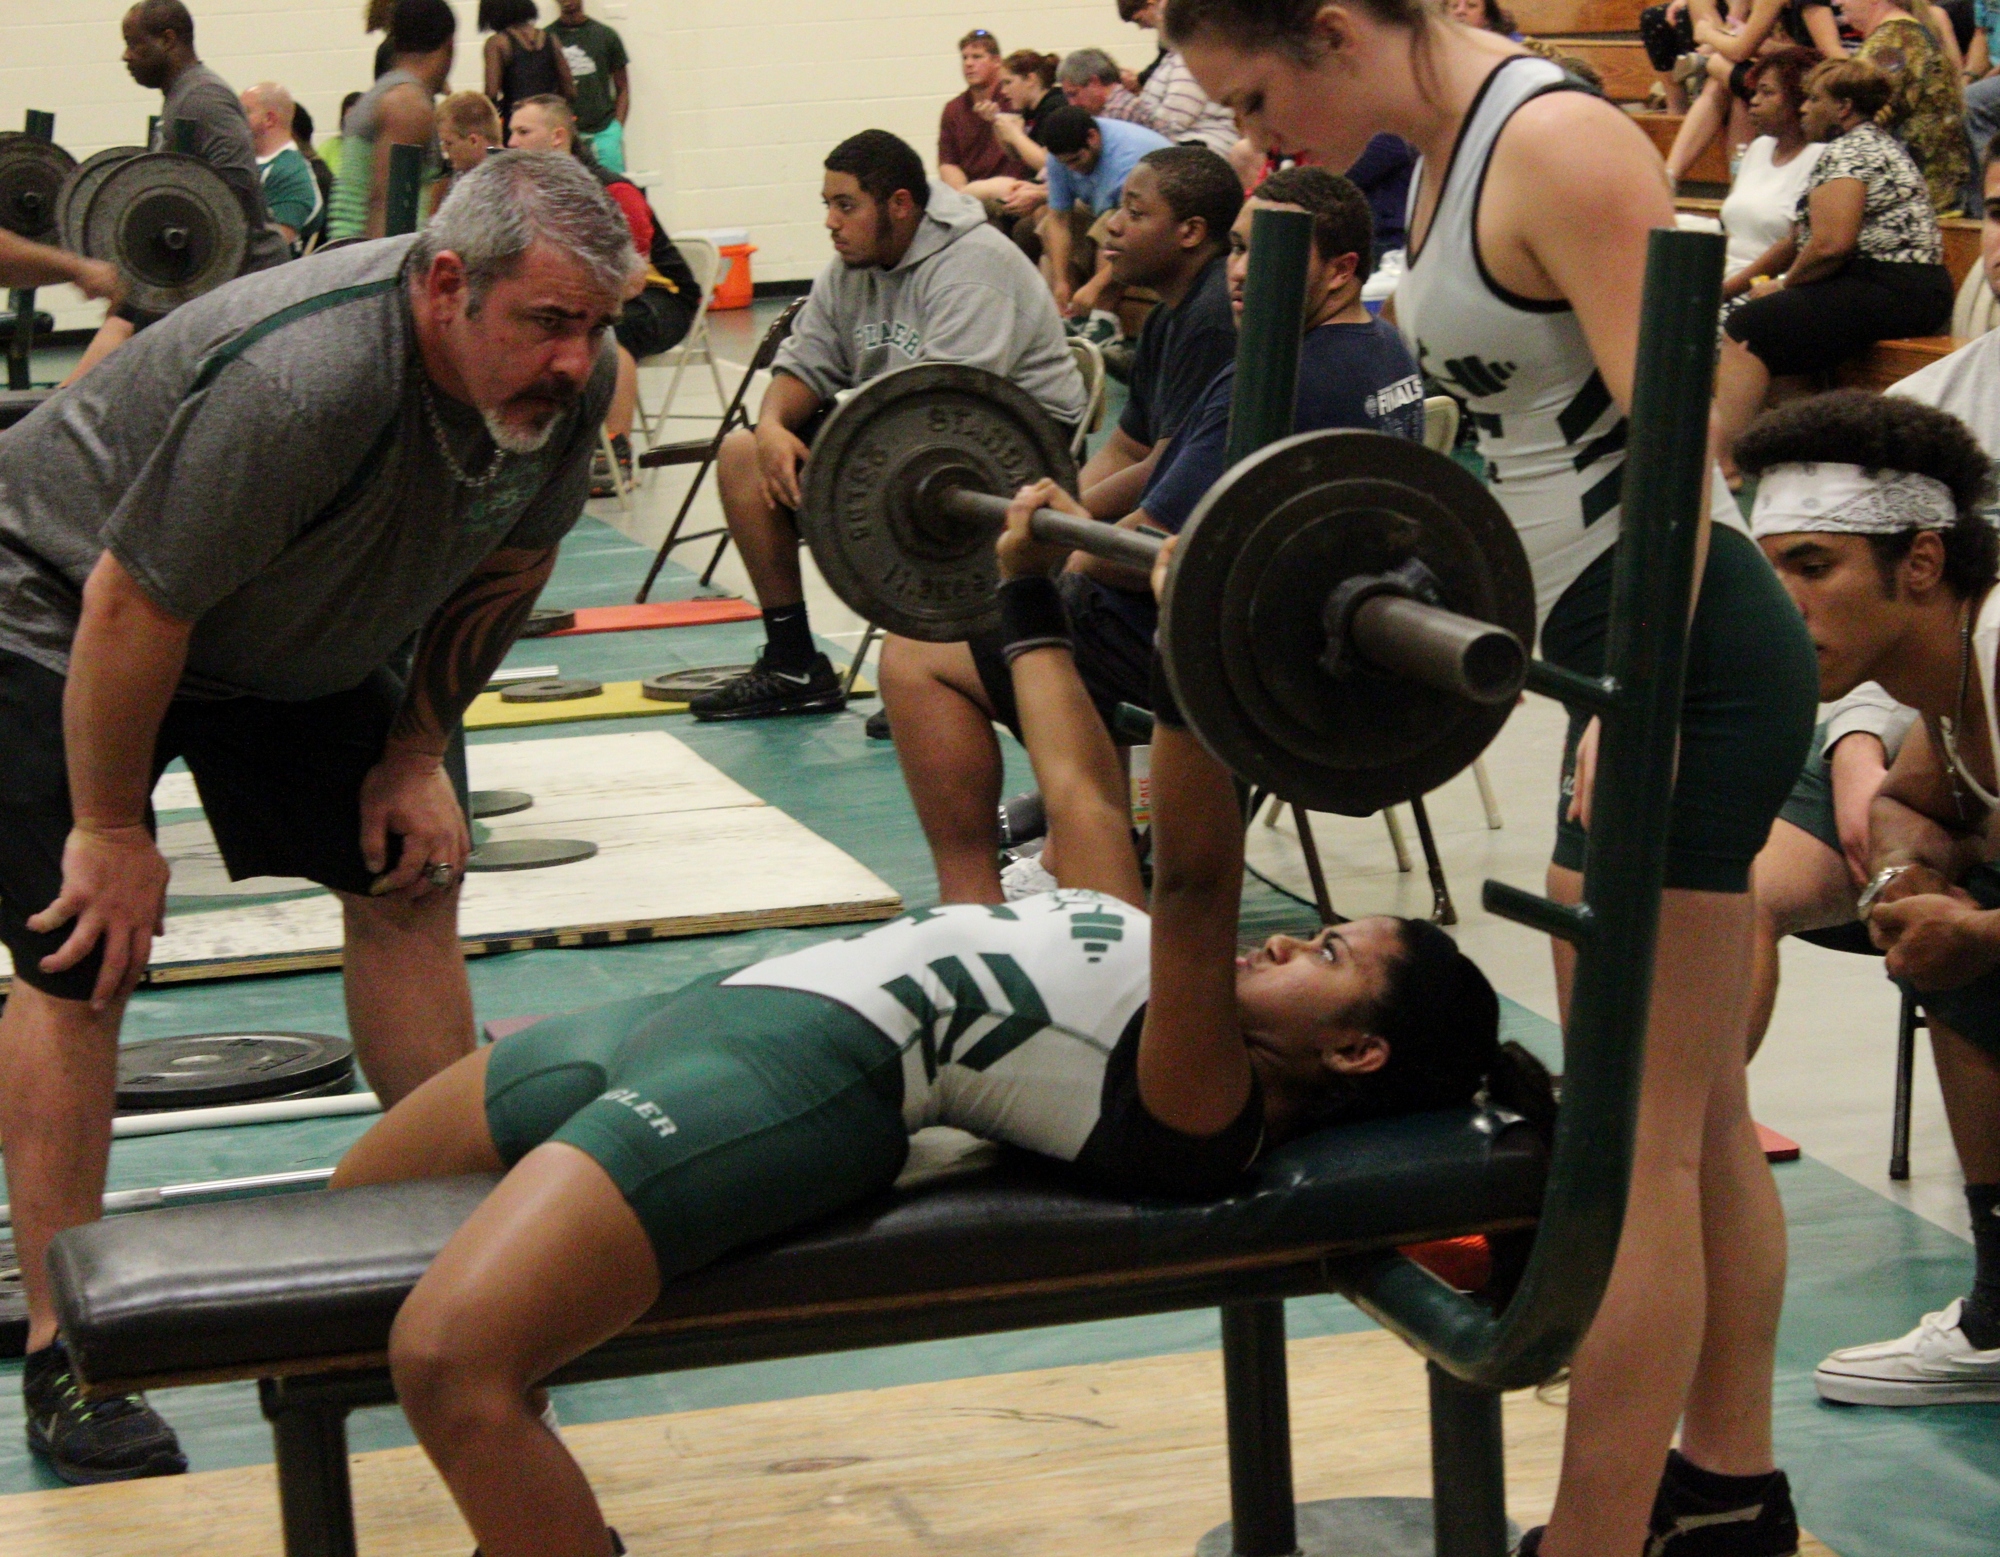 Tiara Sanker broke the school bench record with 110 pounds.